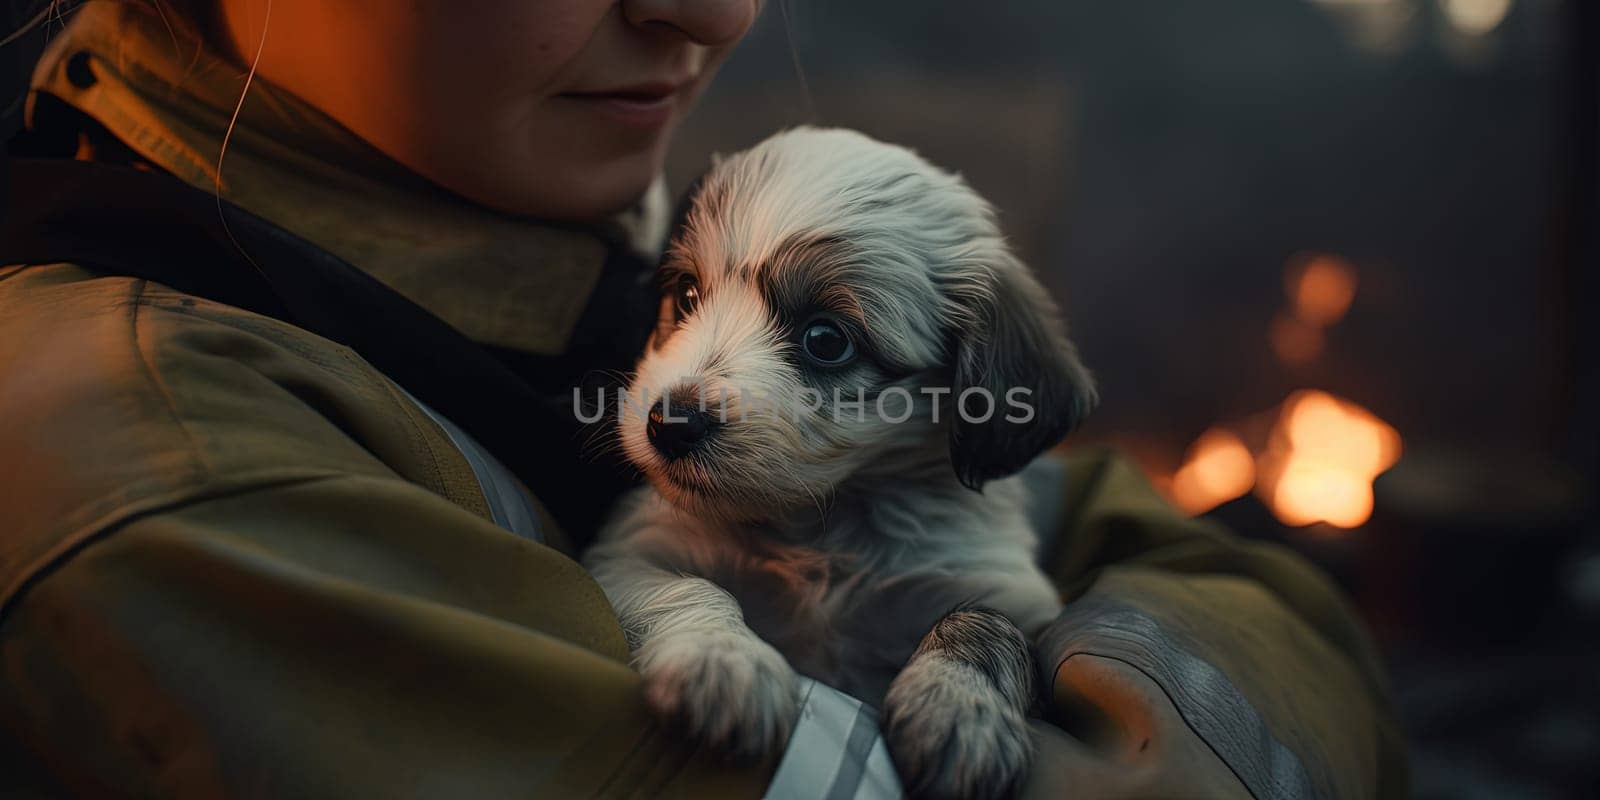 Fireman Holding Wild Puppy Dog During Fire , Concept Nature Wild Life Saving